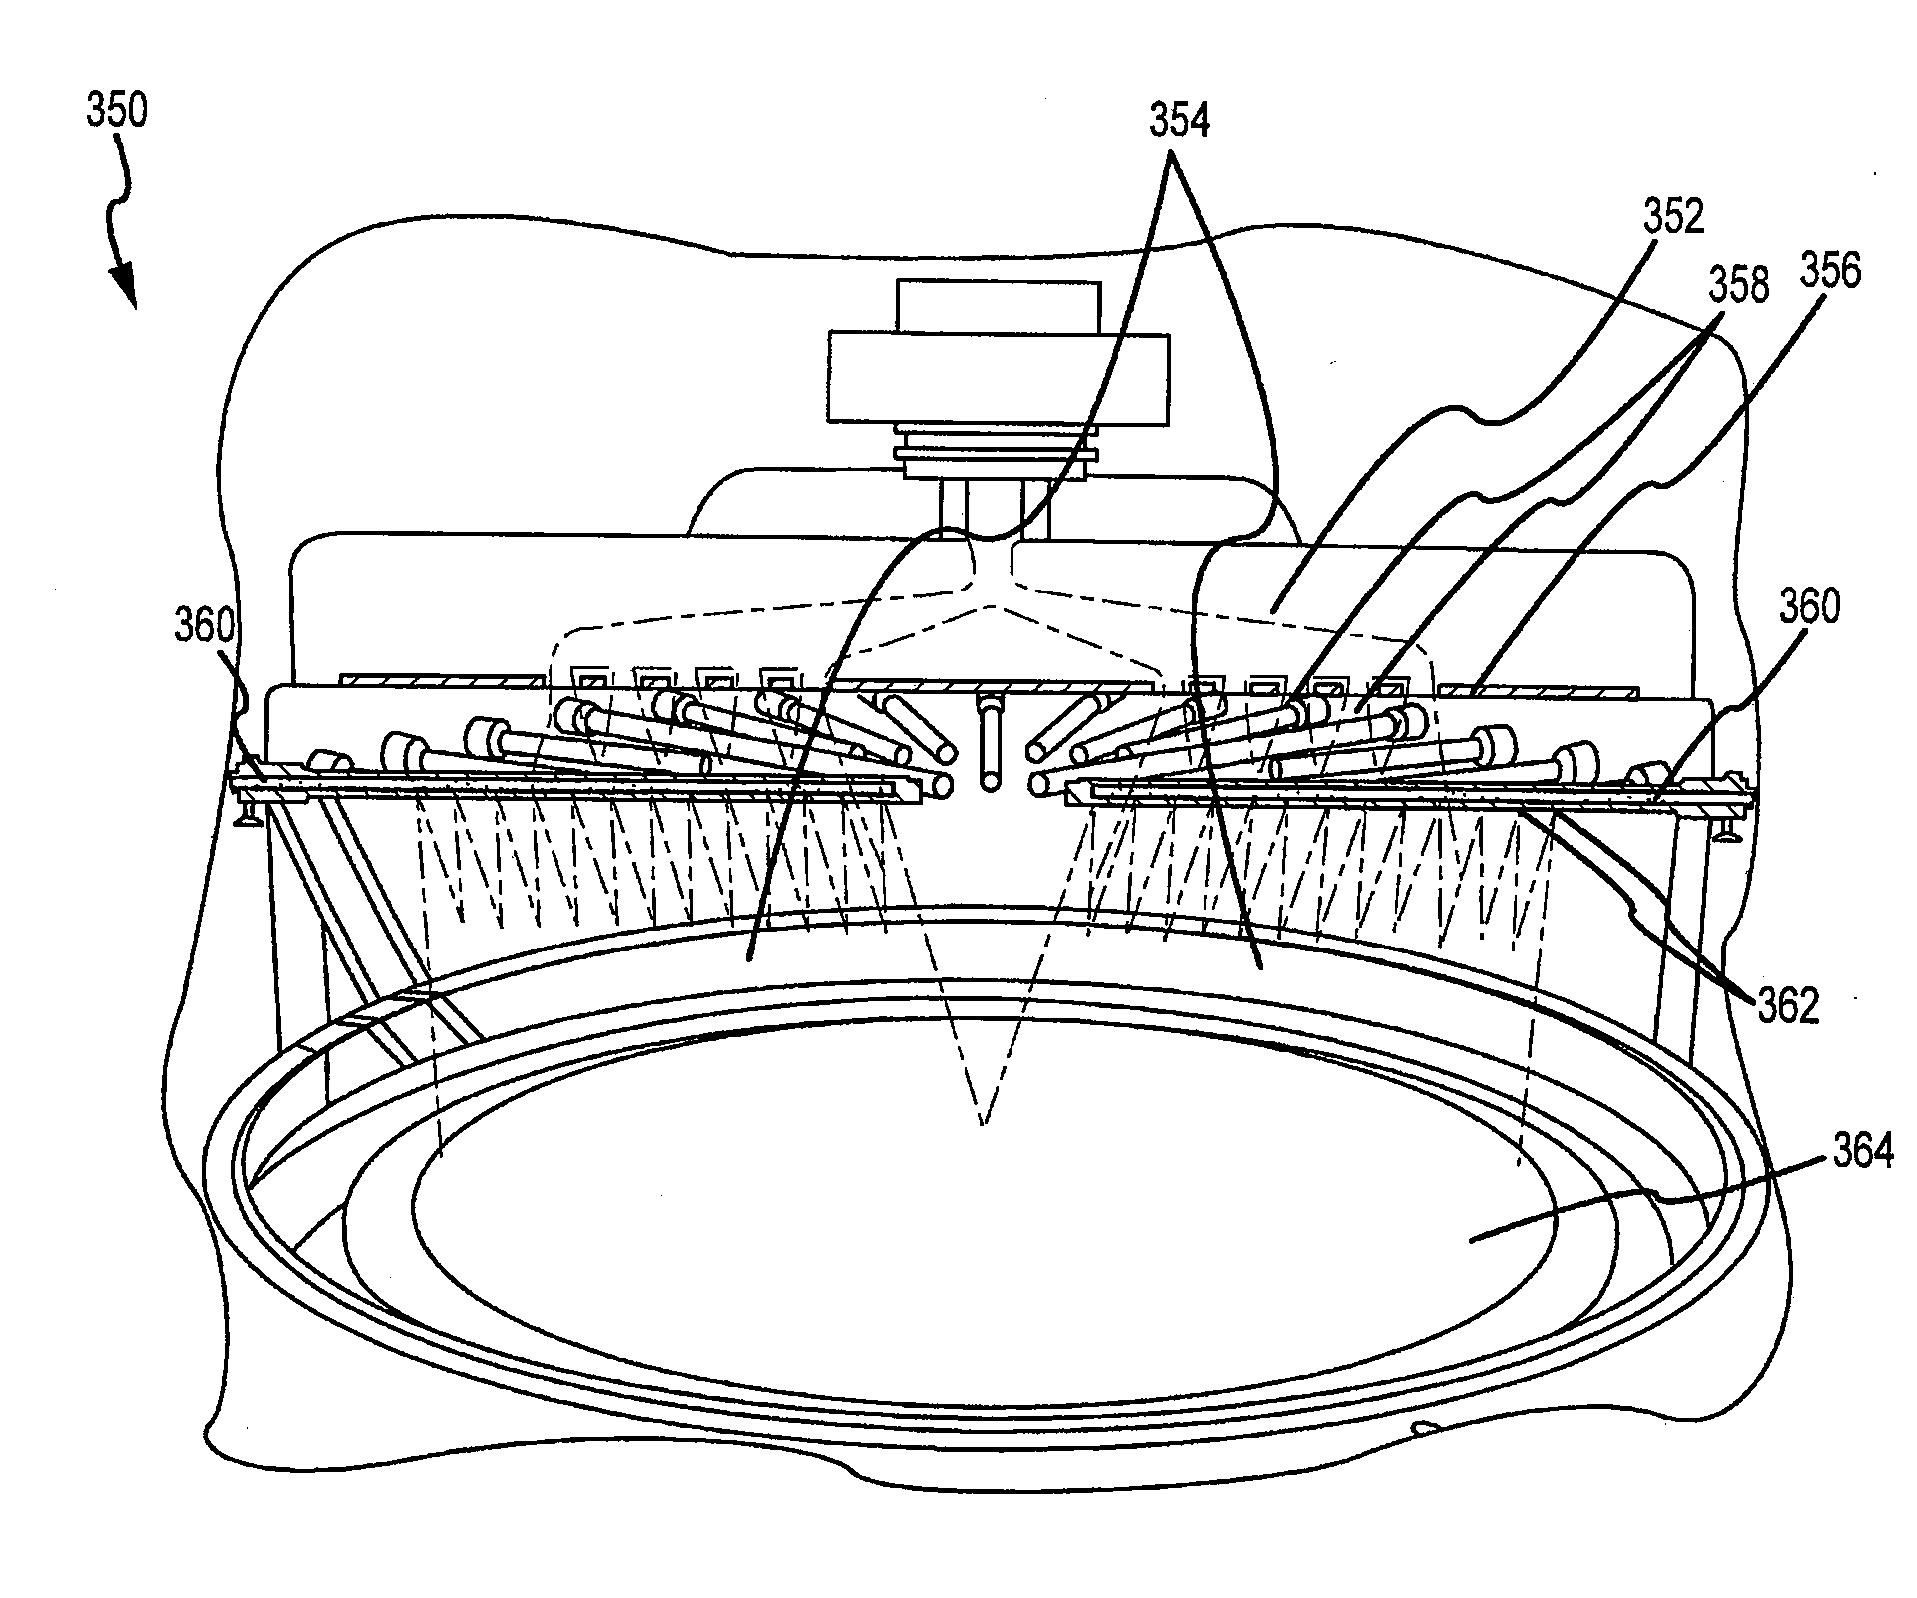 Process chamber for dielectric gapfill